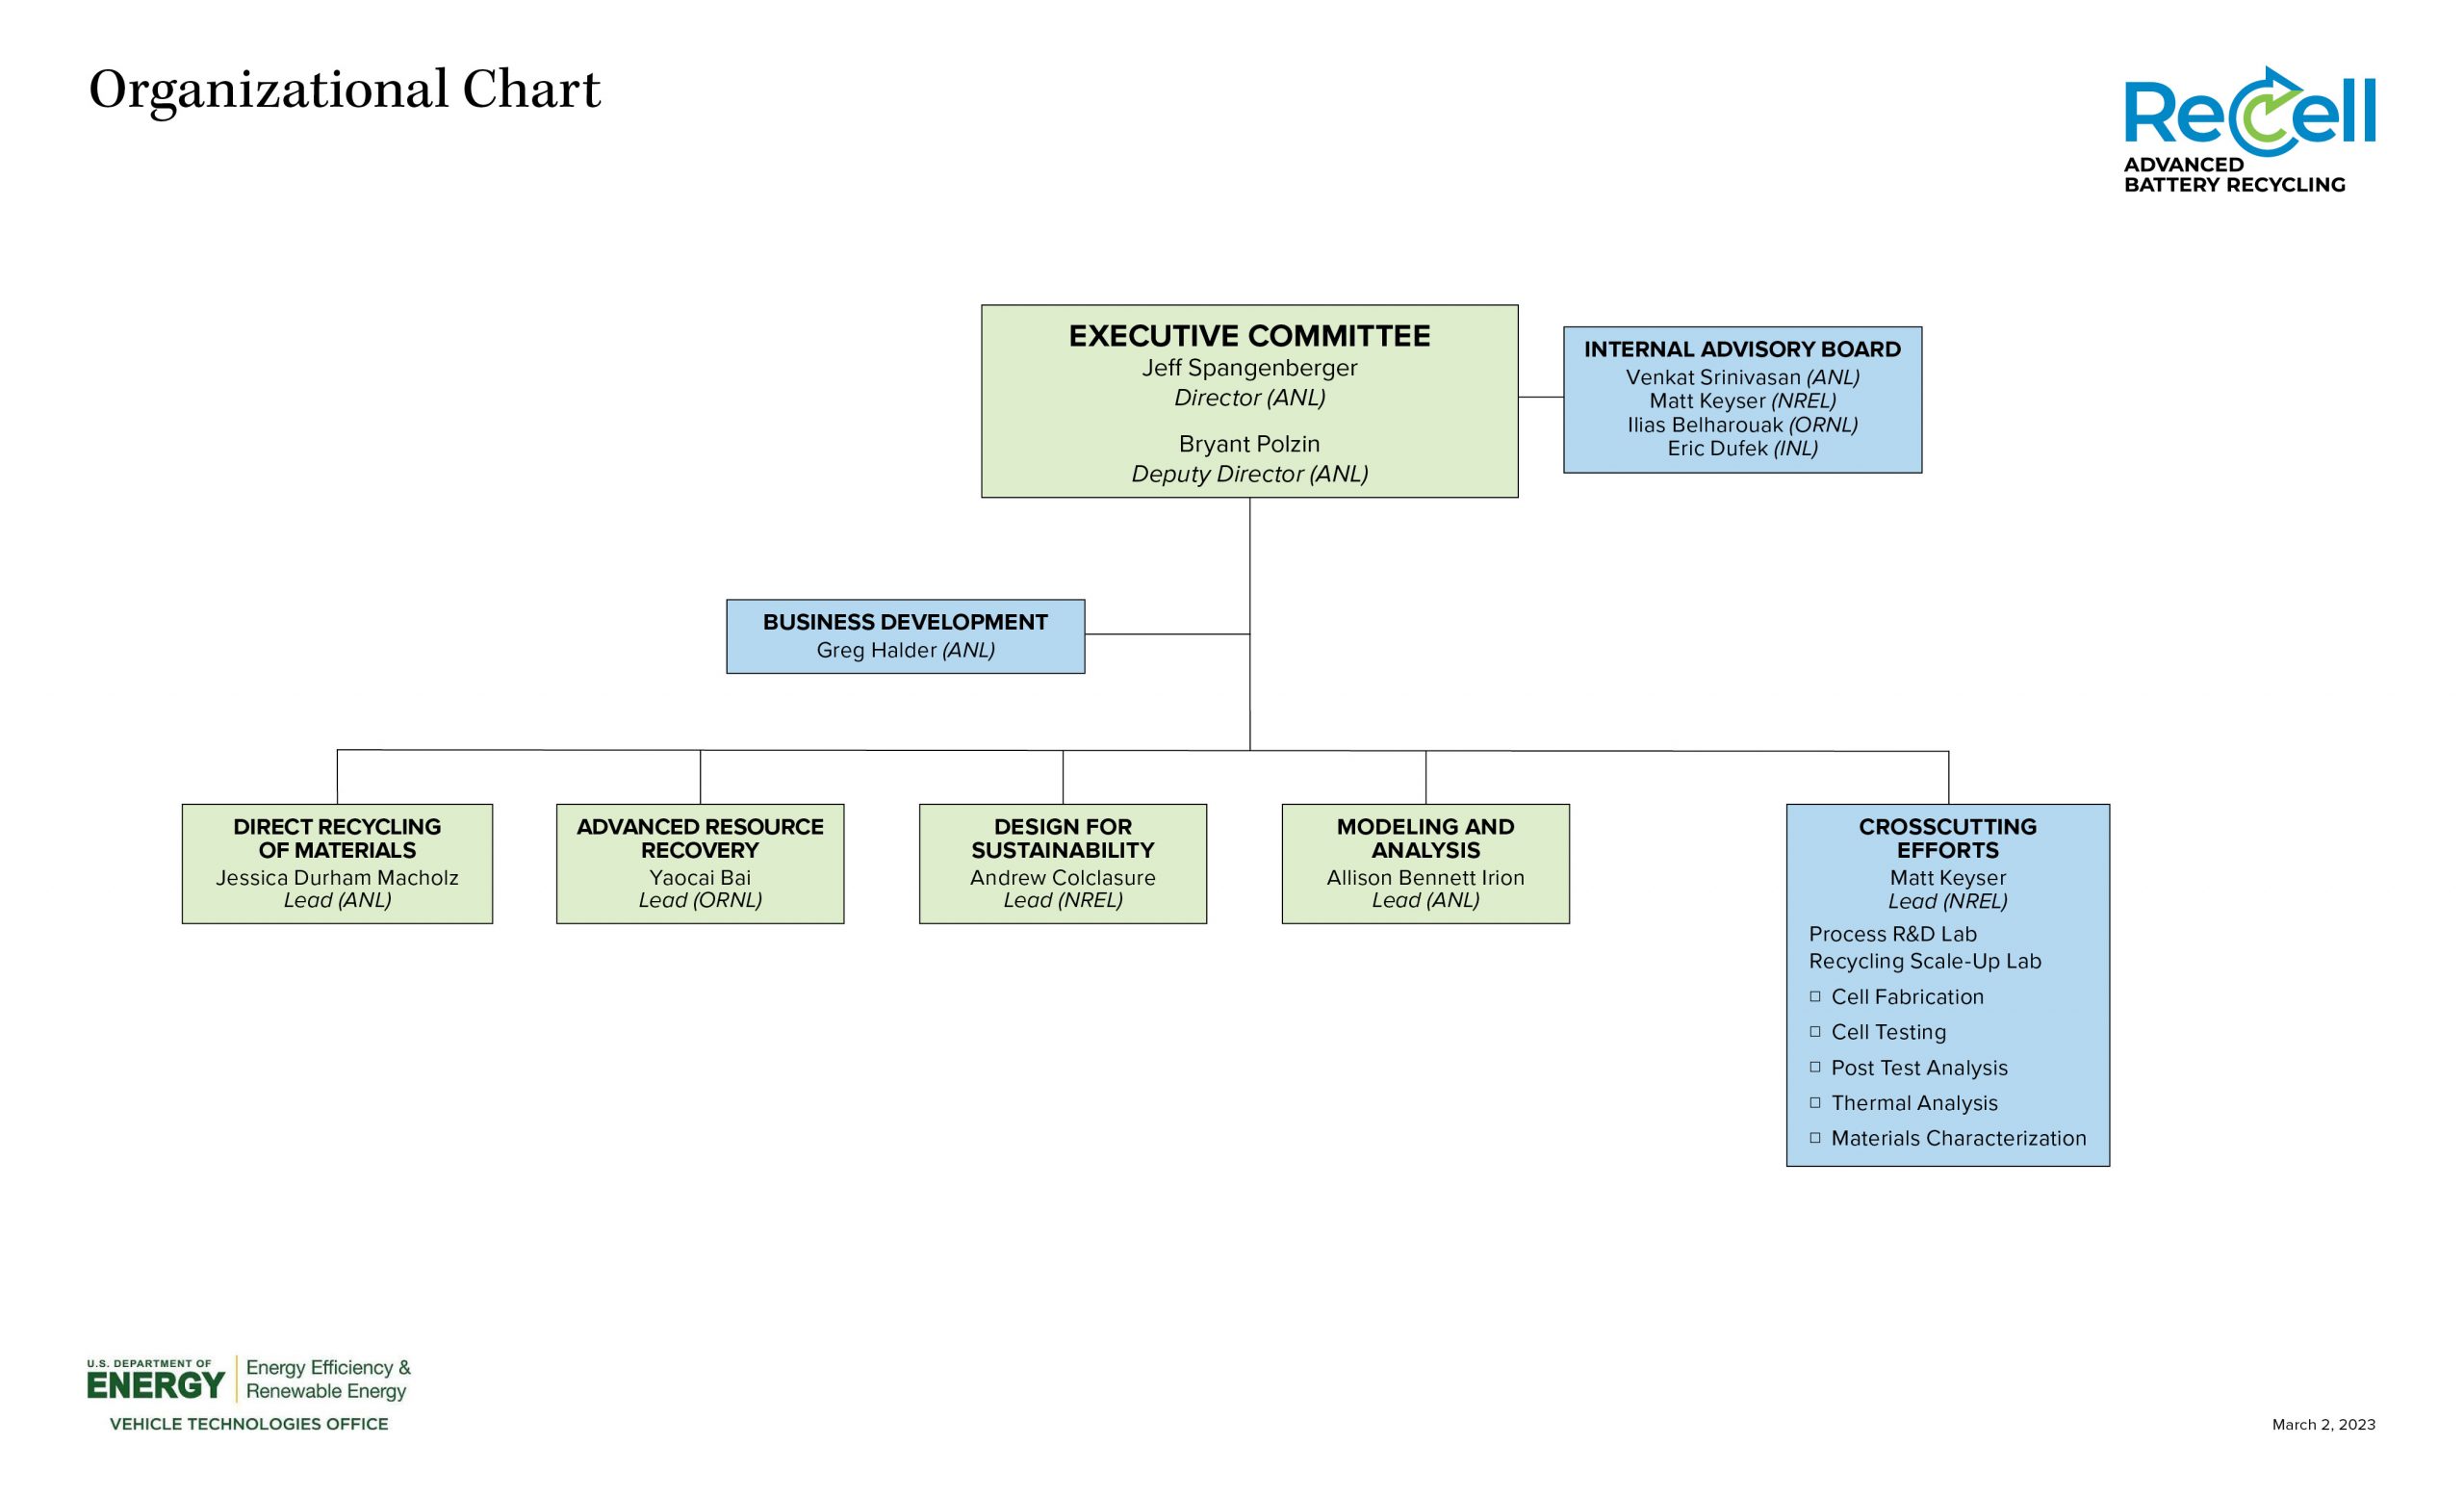 ReCell org chart